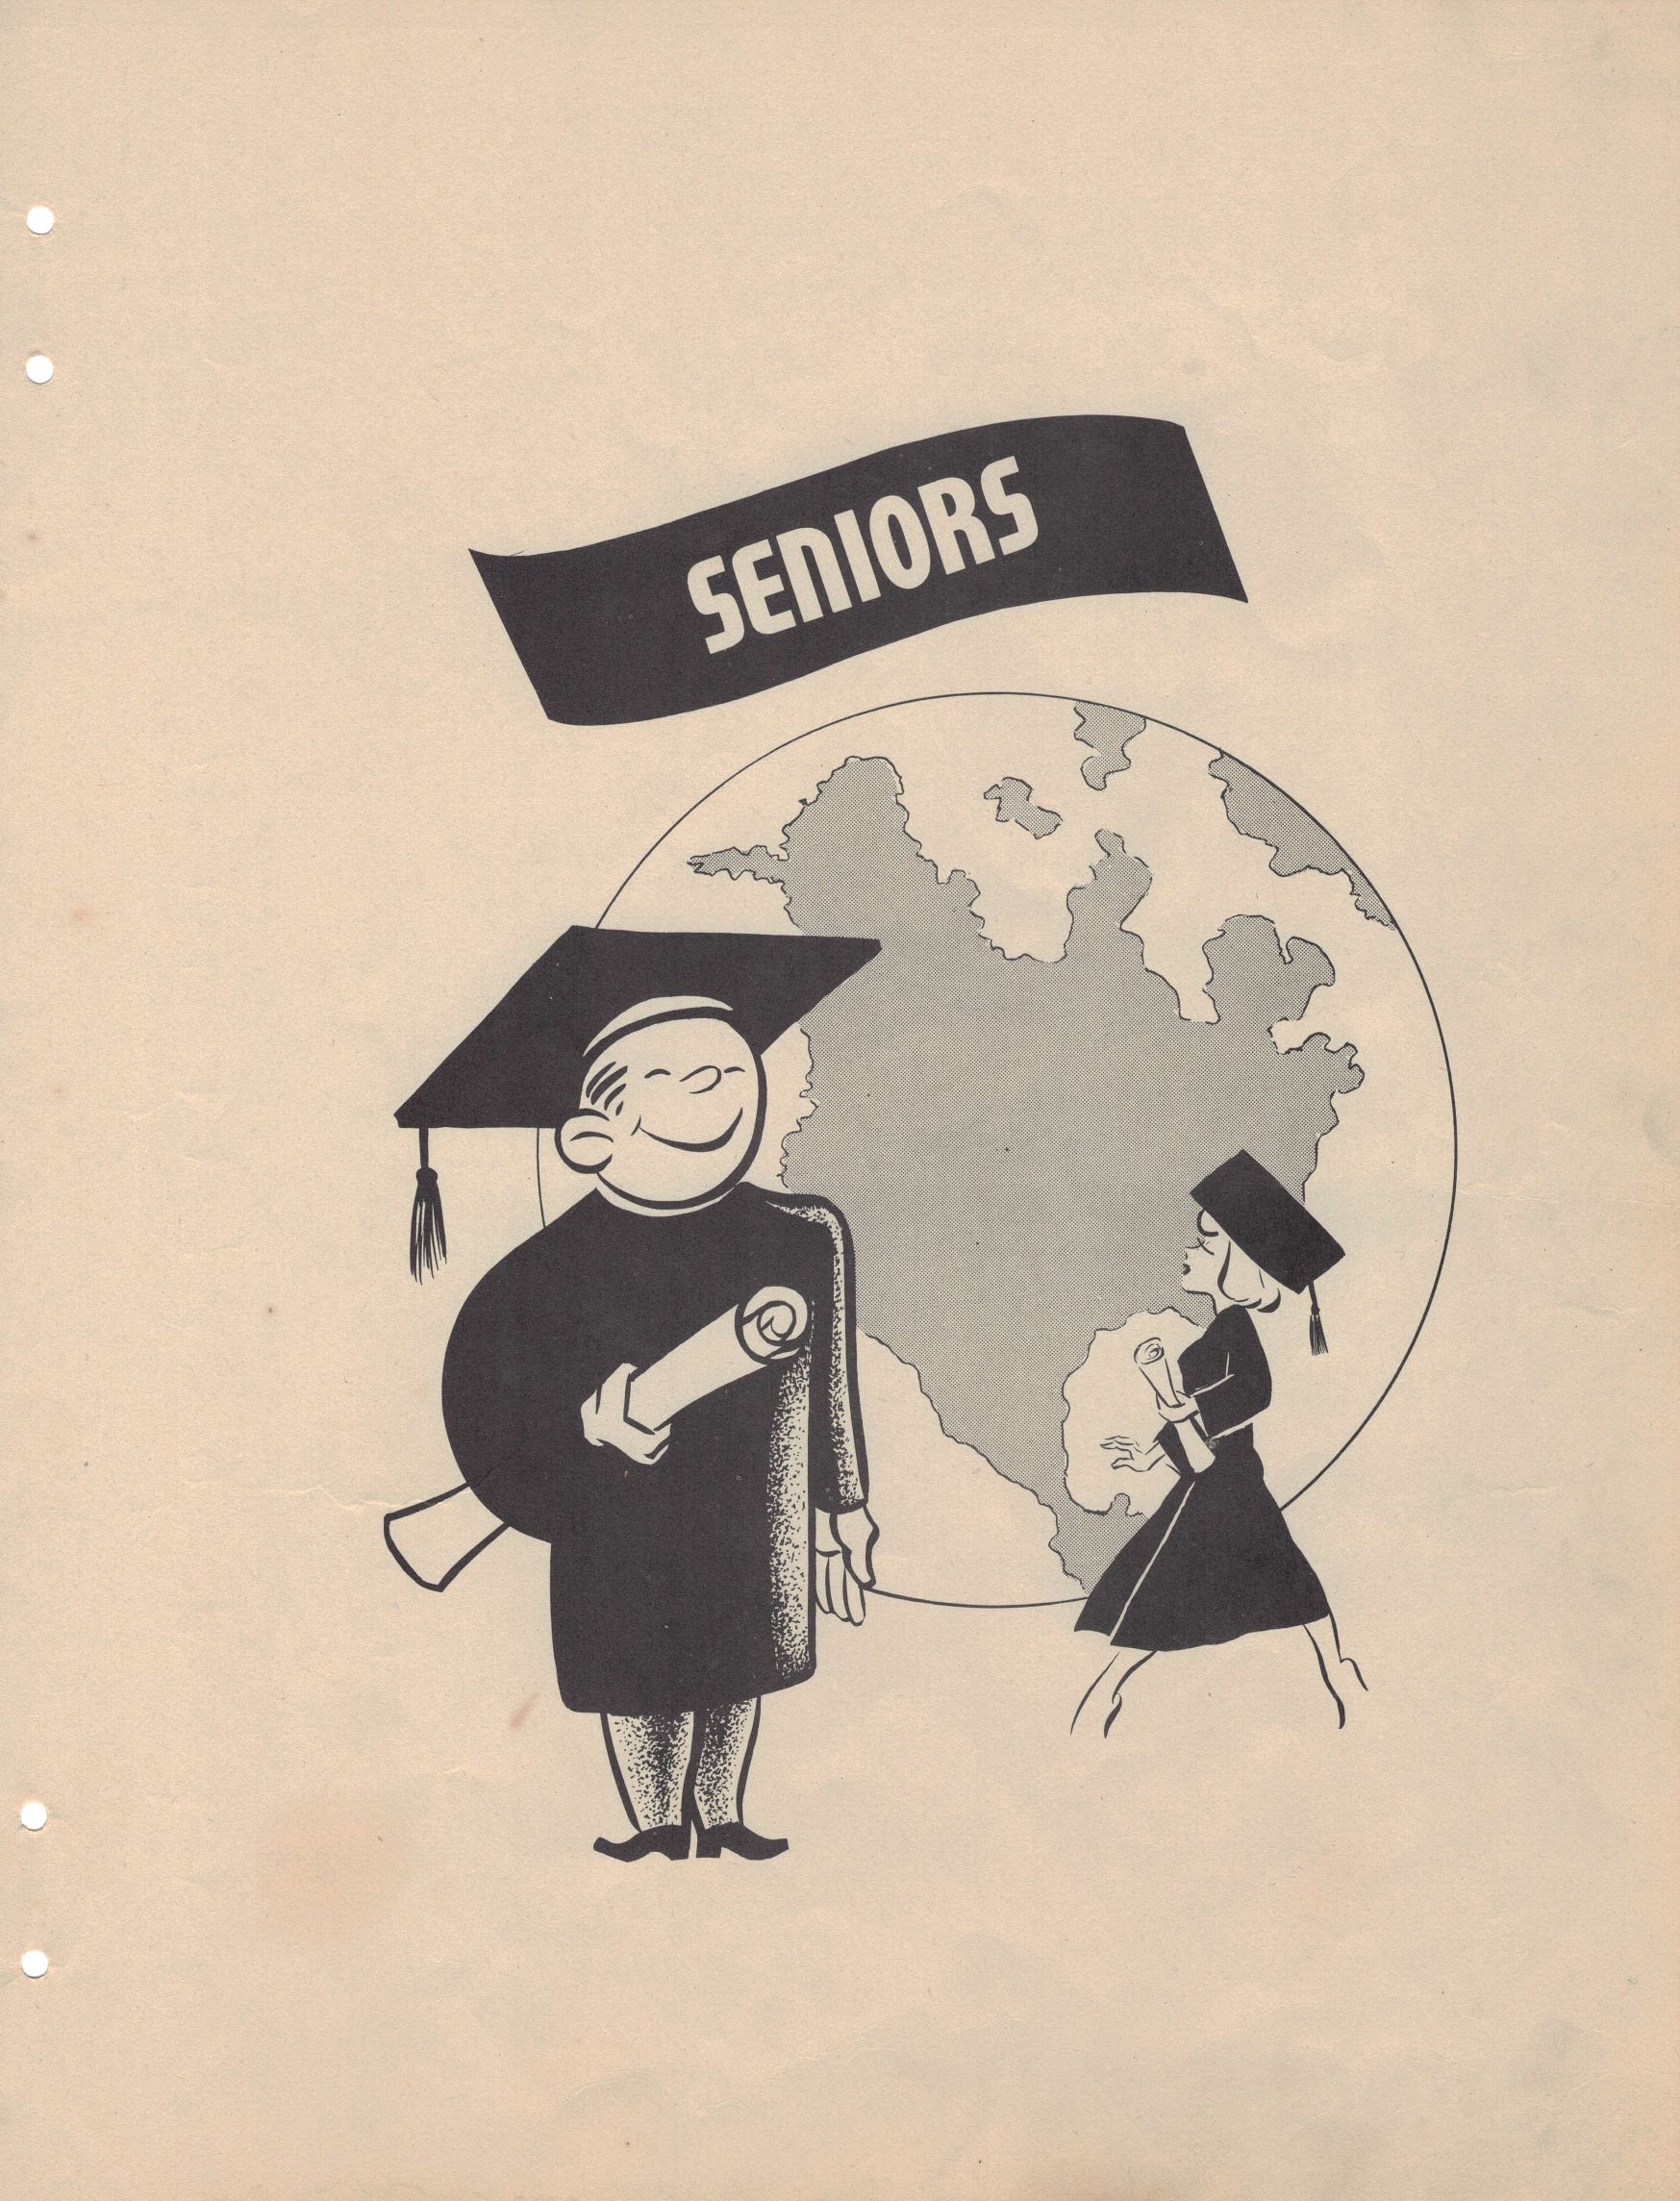 Graphic of man and woman in graduation regalia in front of world, under header "Seniors"